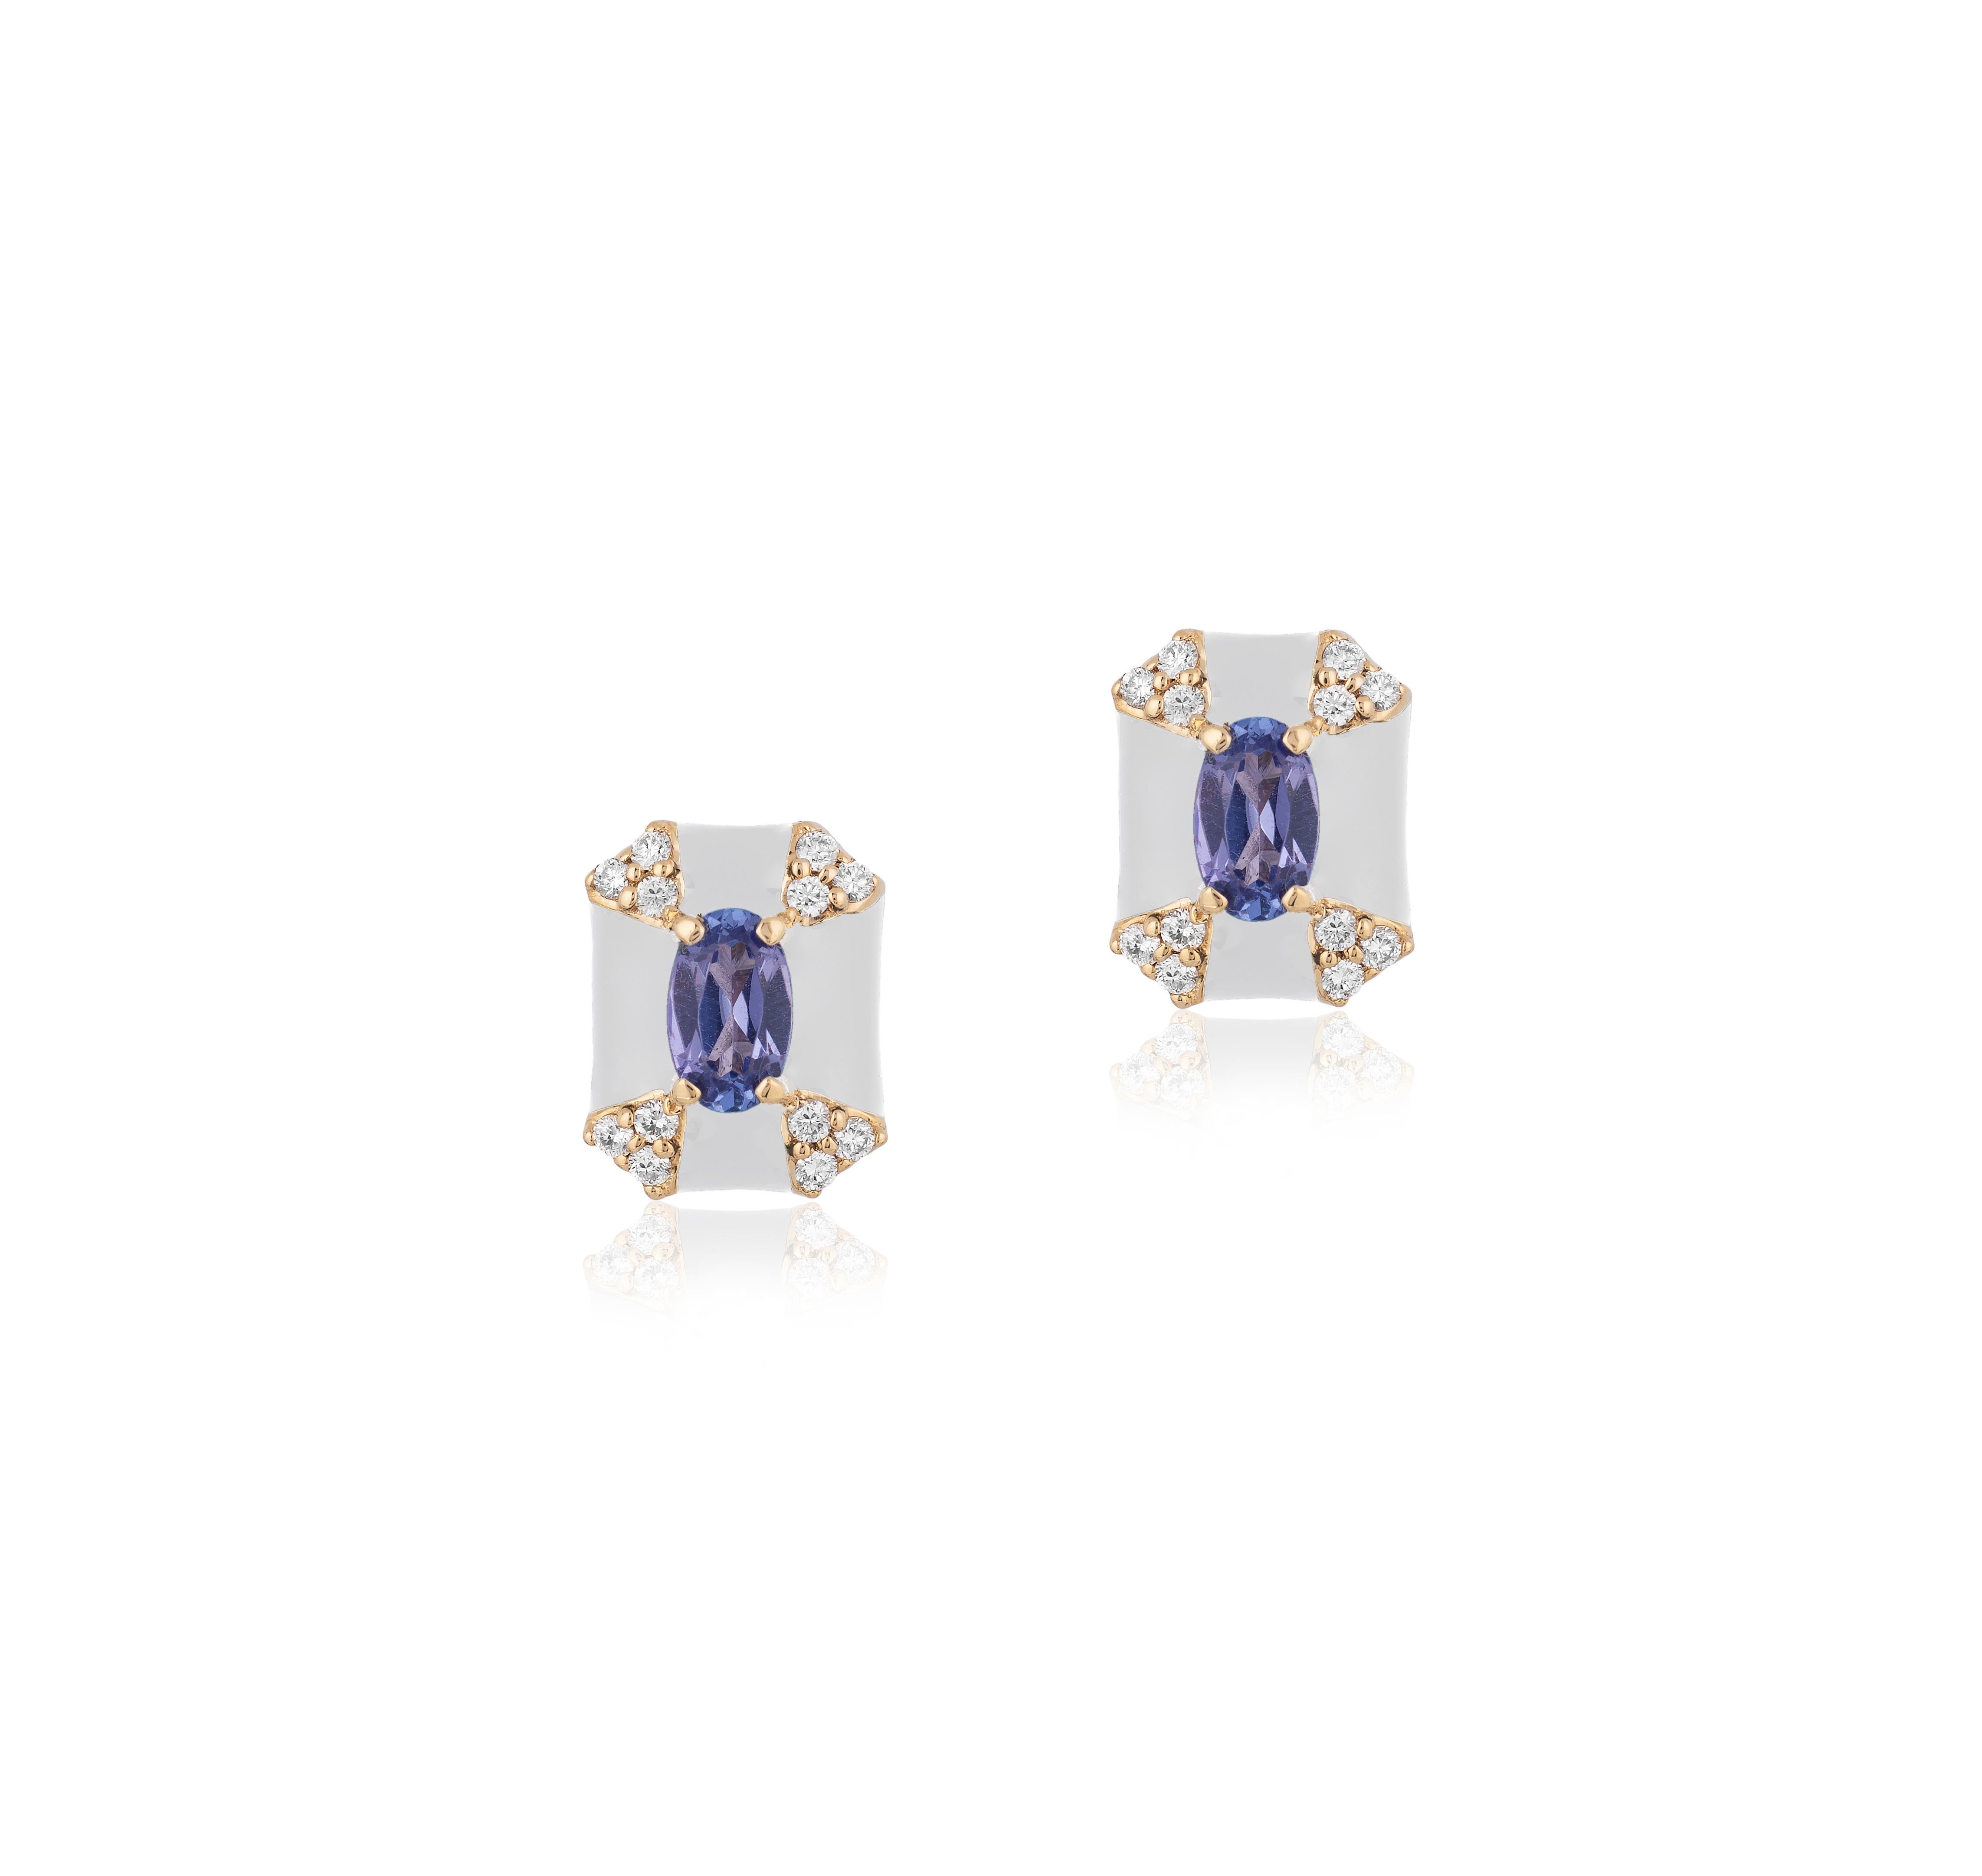 Contemporary Goshwara Octagon White Enamel with Sapphire and Diamonds Stud Earrings For Sale